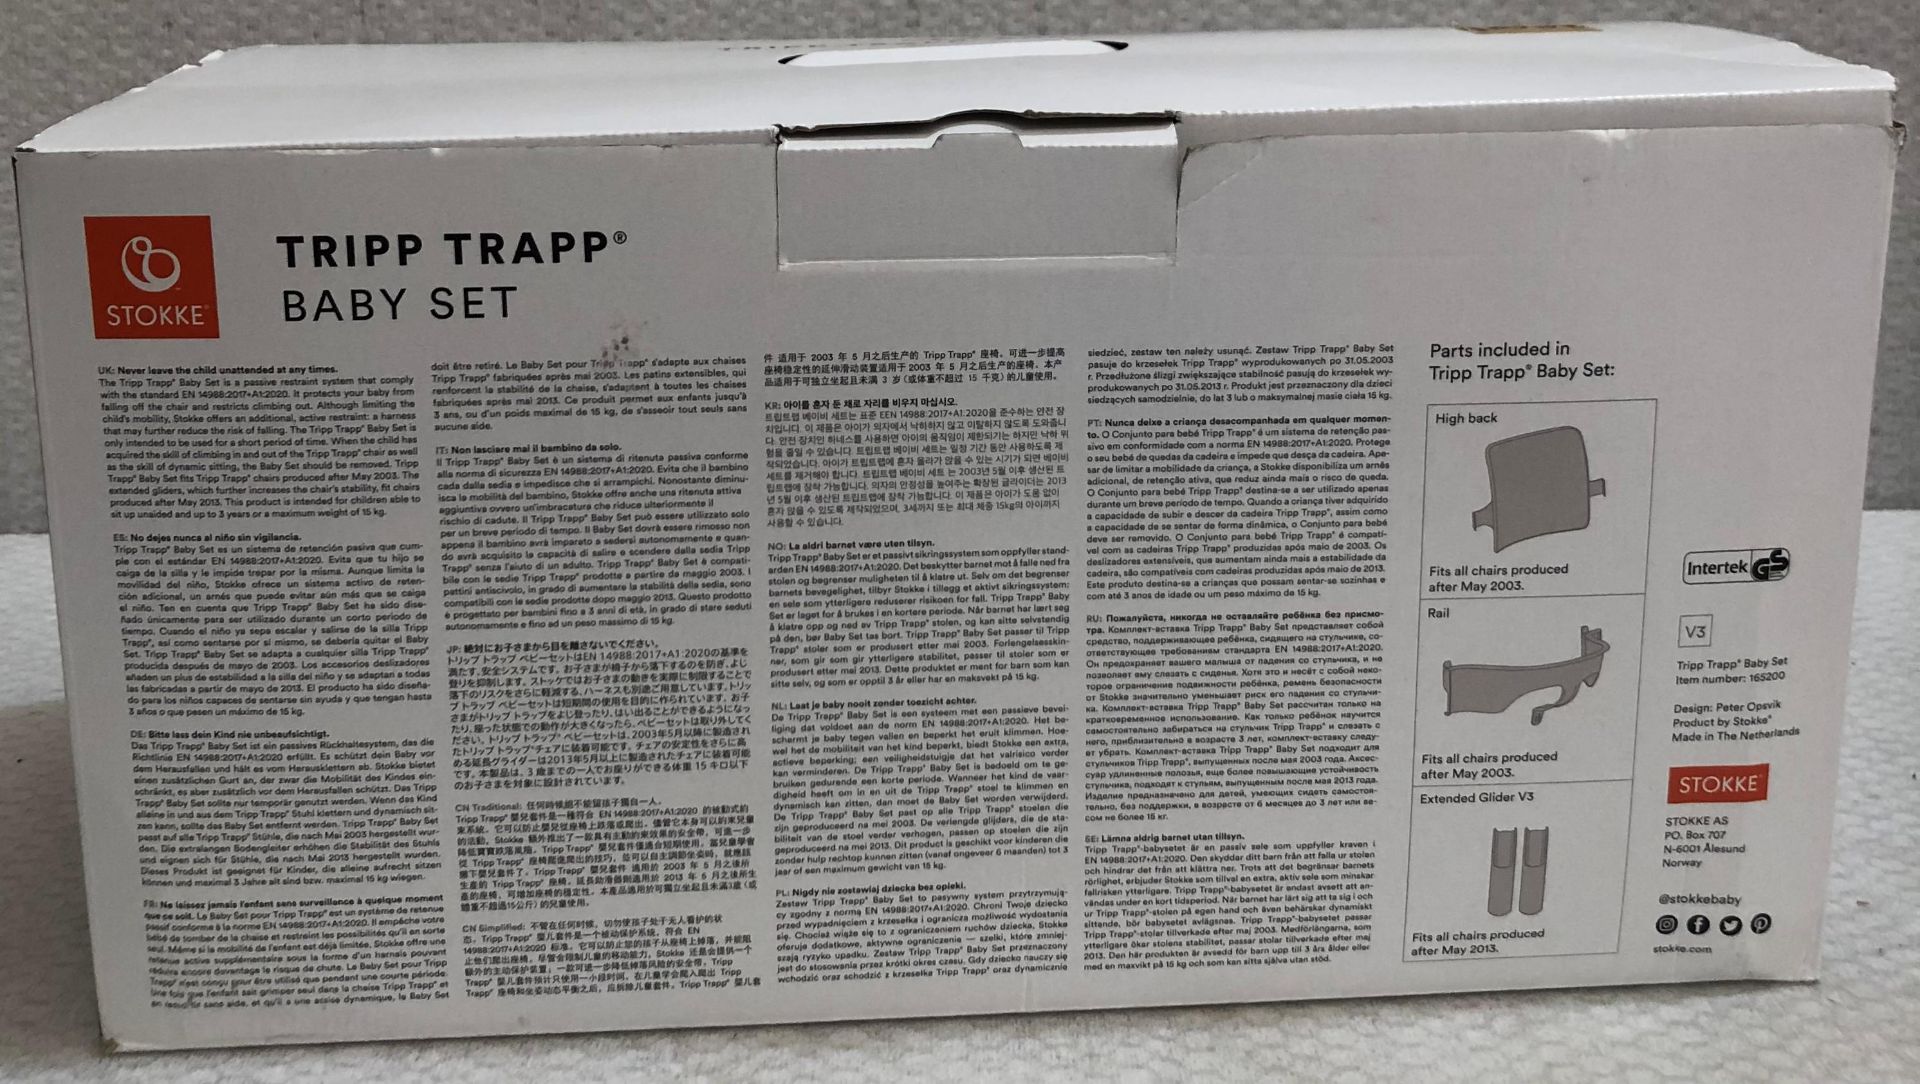 1 x Tripp Trapp Baby Set in Storm Grey - New/Boxed - HTYS313 - CL987 - Location: Altrincham WA14 - - Image 4 of 5